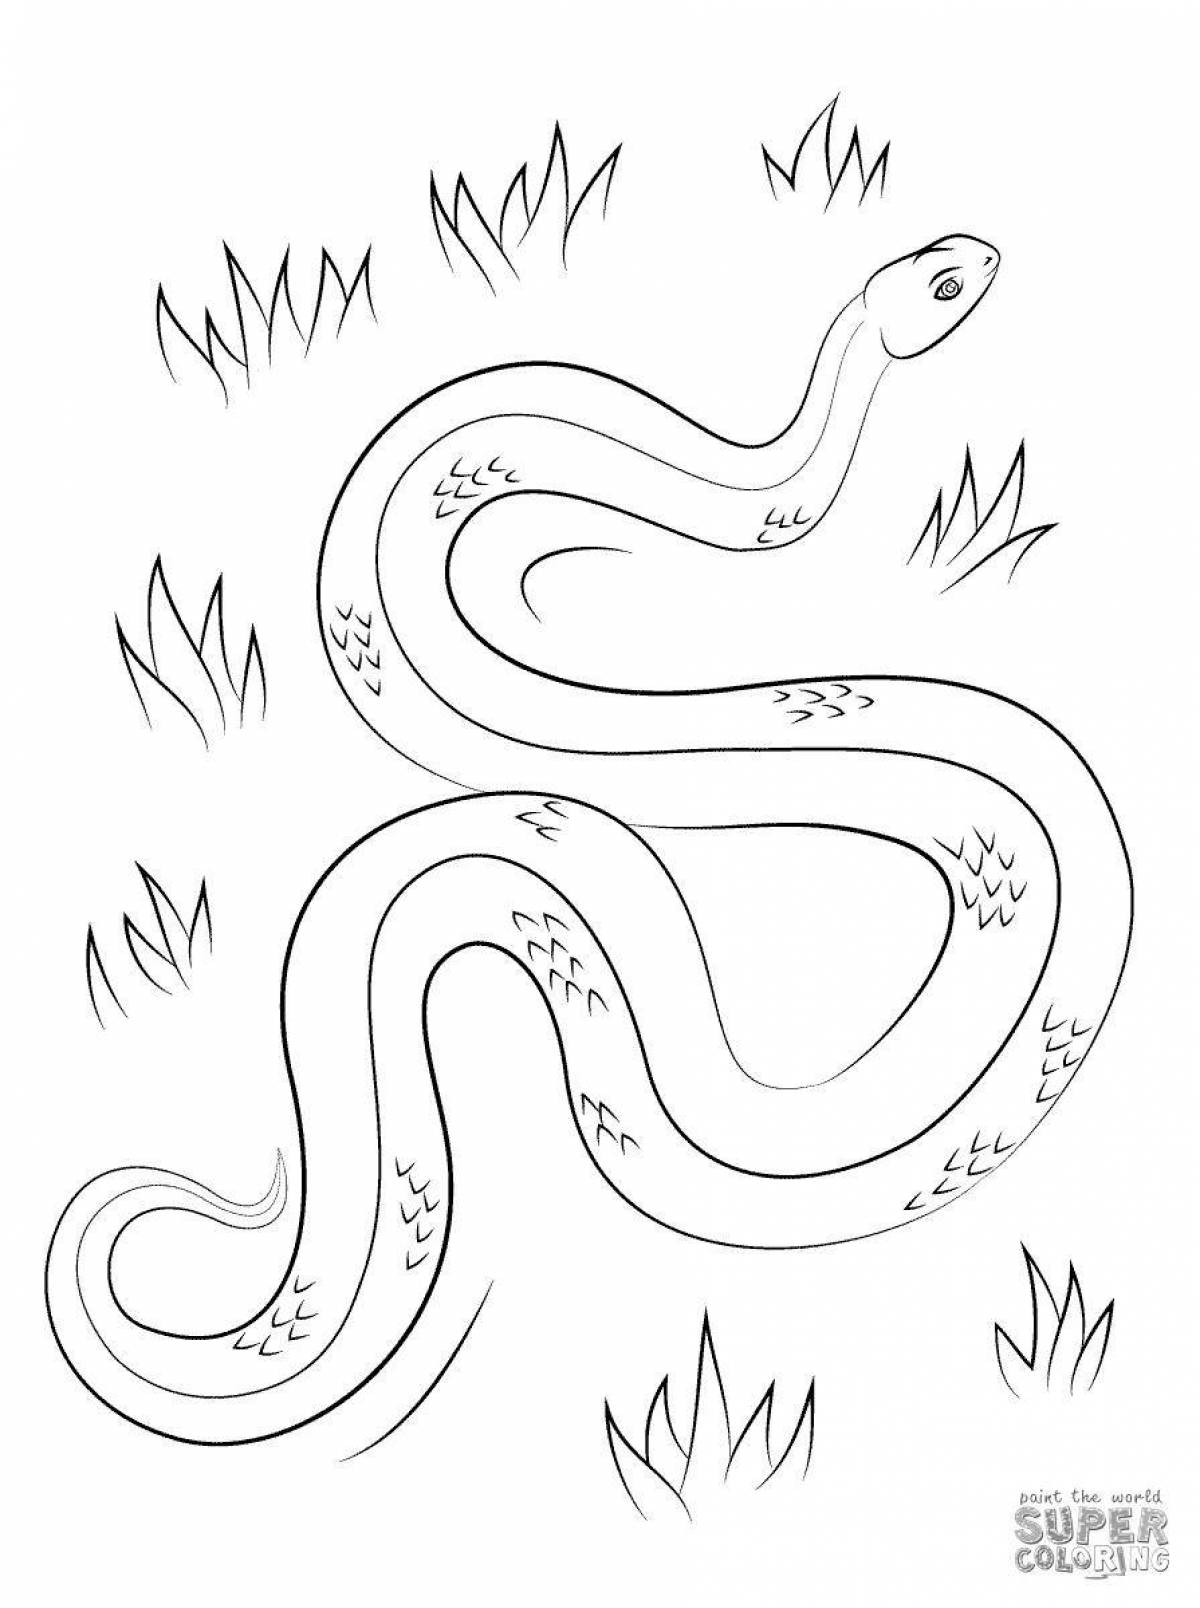 Colorful blue snake coloring book